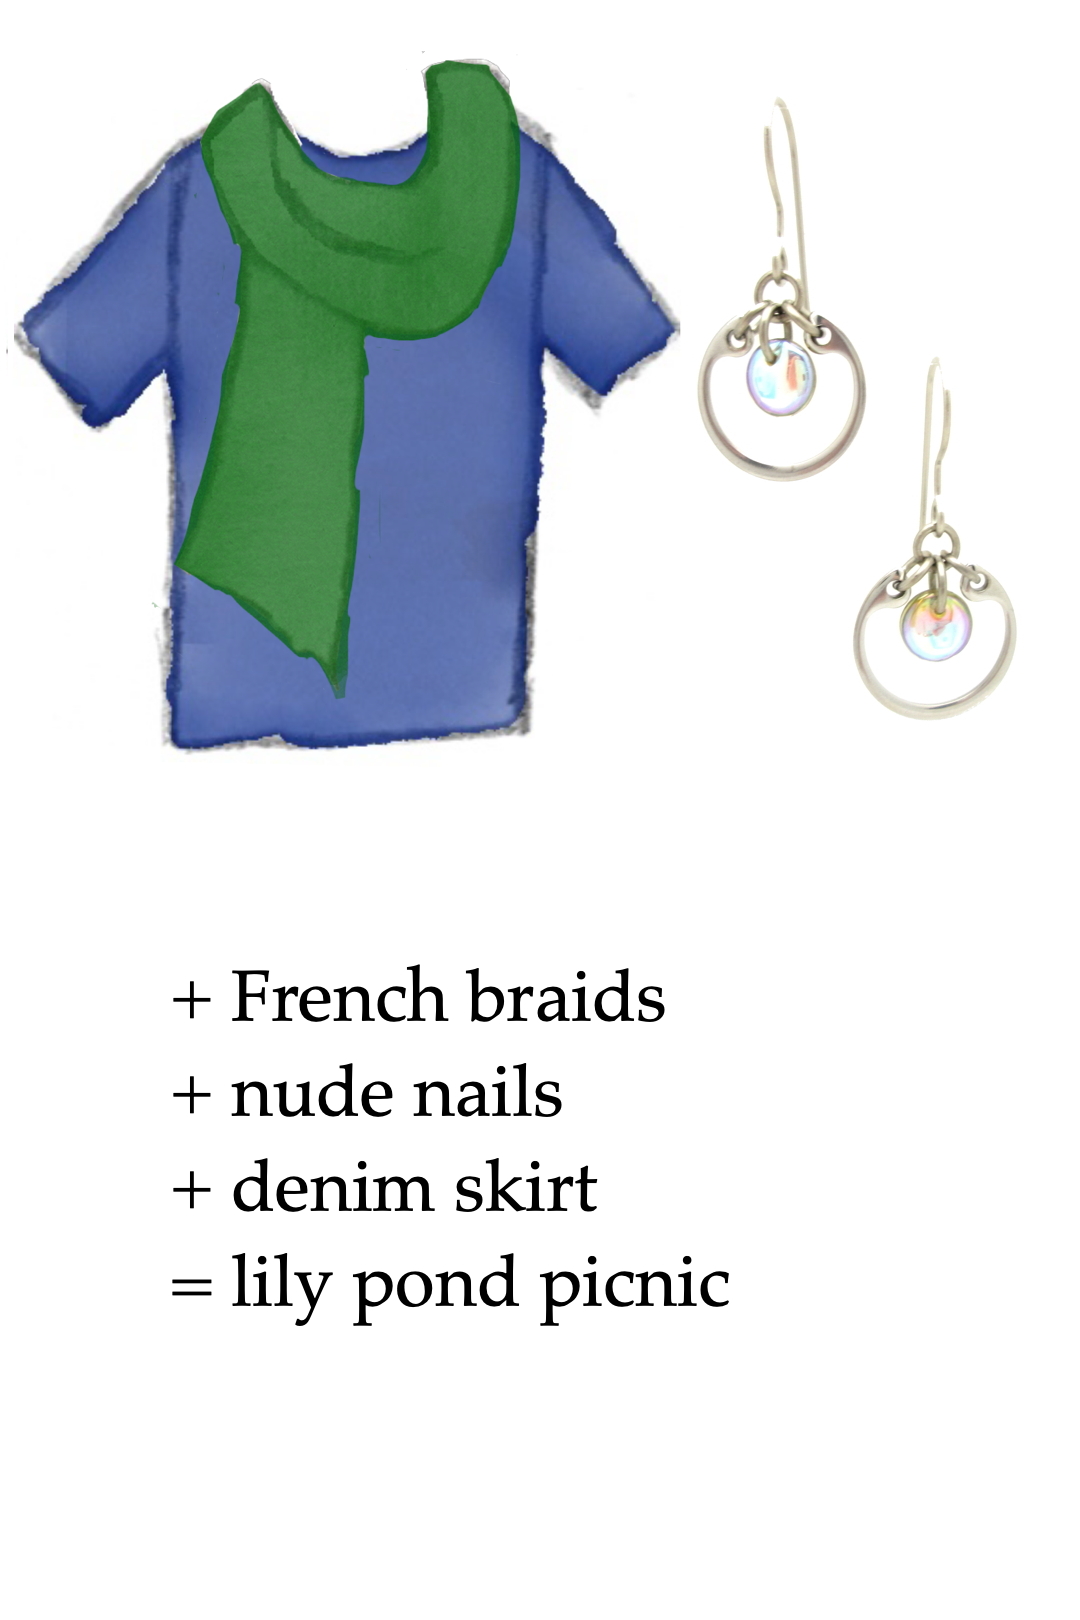 style sketch of a blue tee + emerald green scarf with pale rainbow and silver-tone modern circle earrings by wraptillion; text on image reads + French braids + nude nails + denim skirt = lily pond picnic